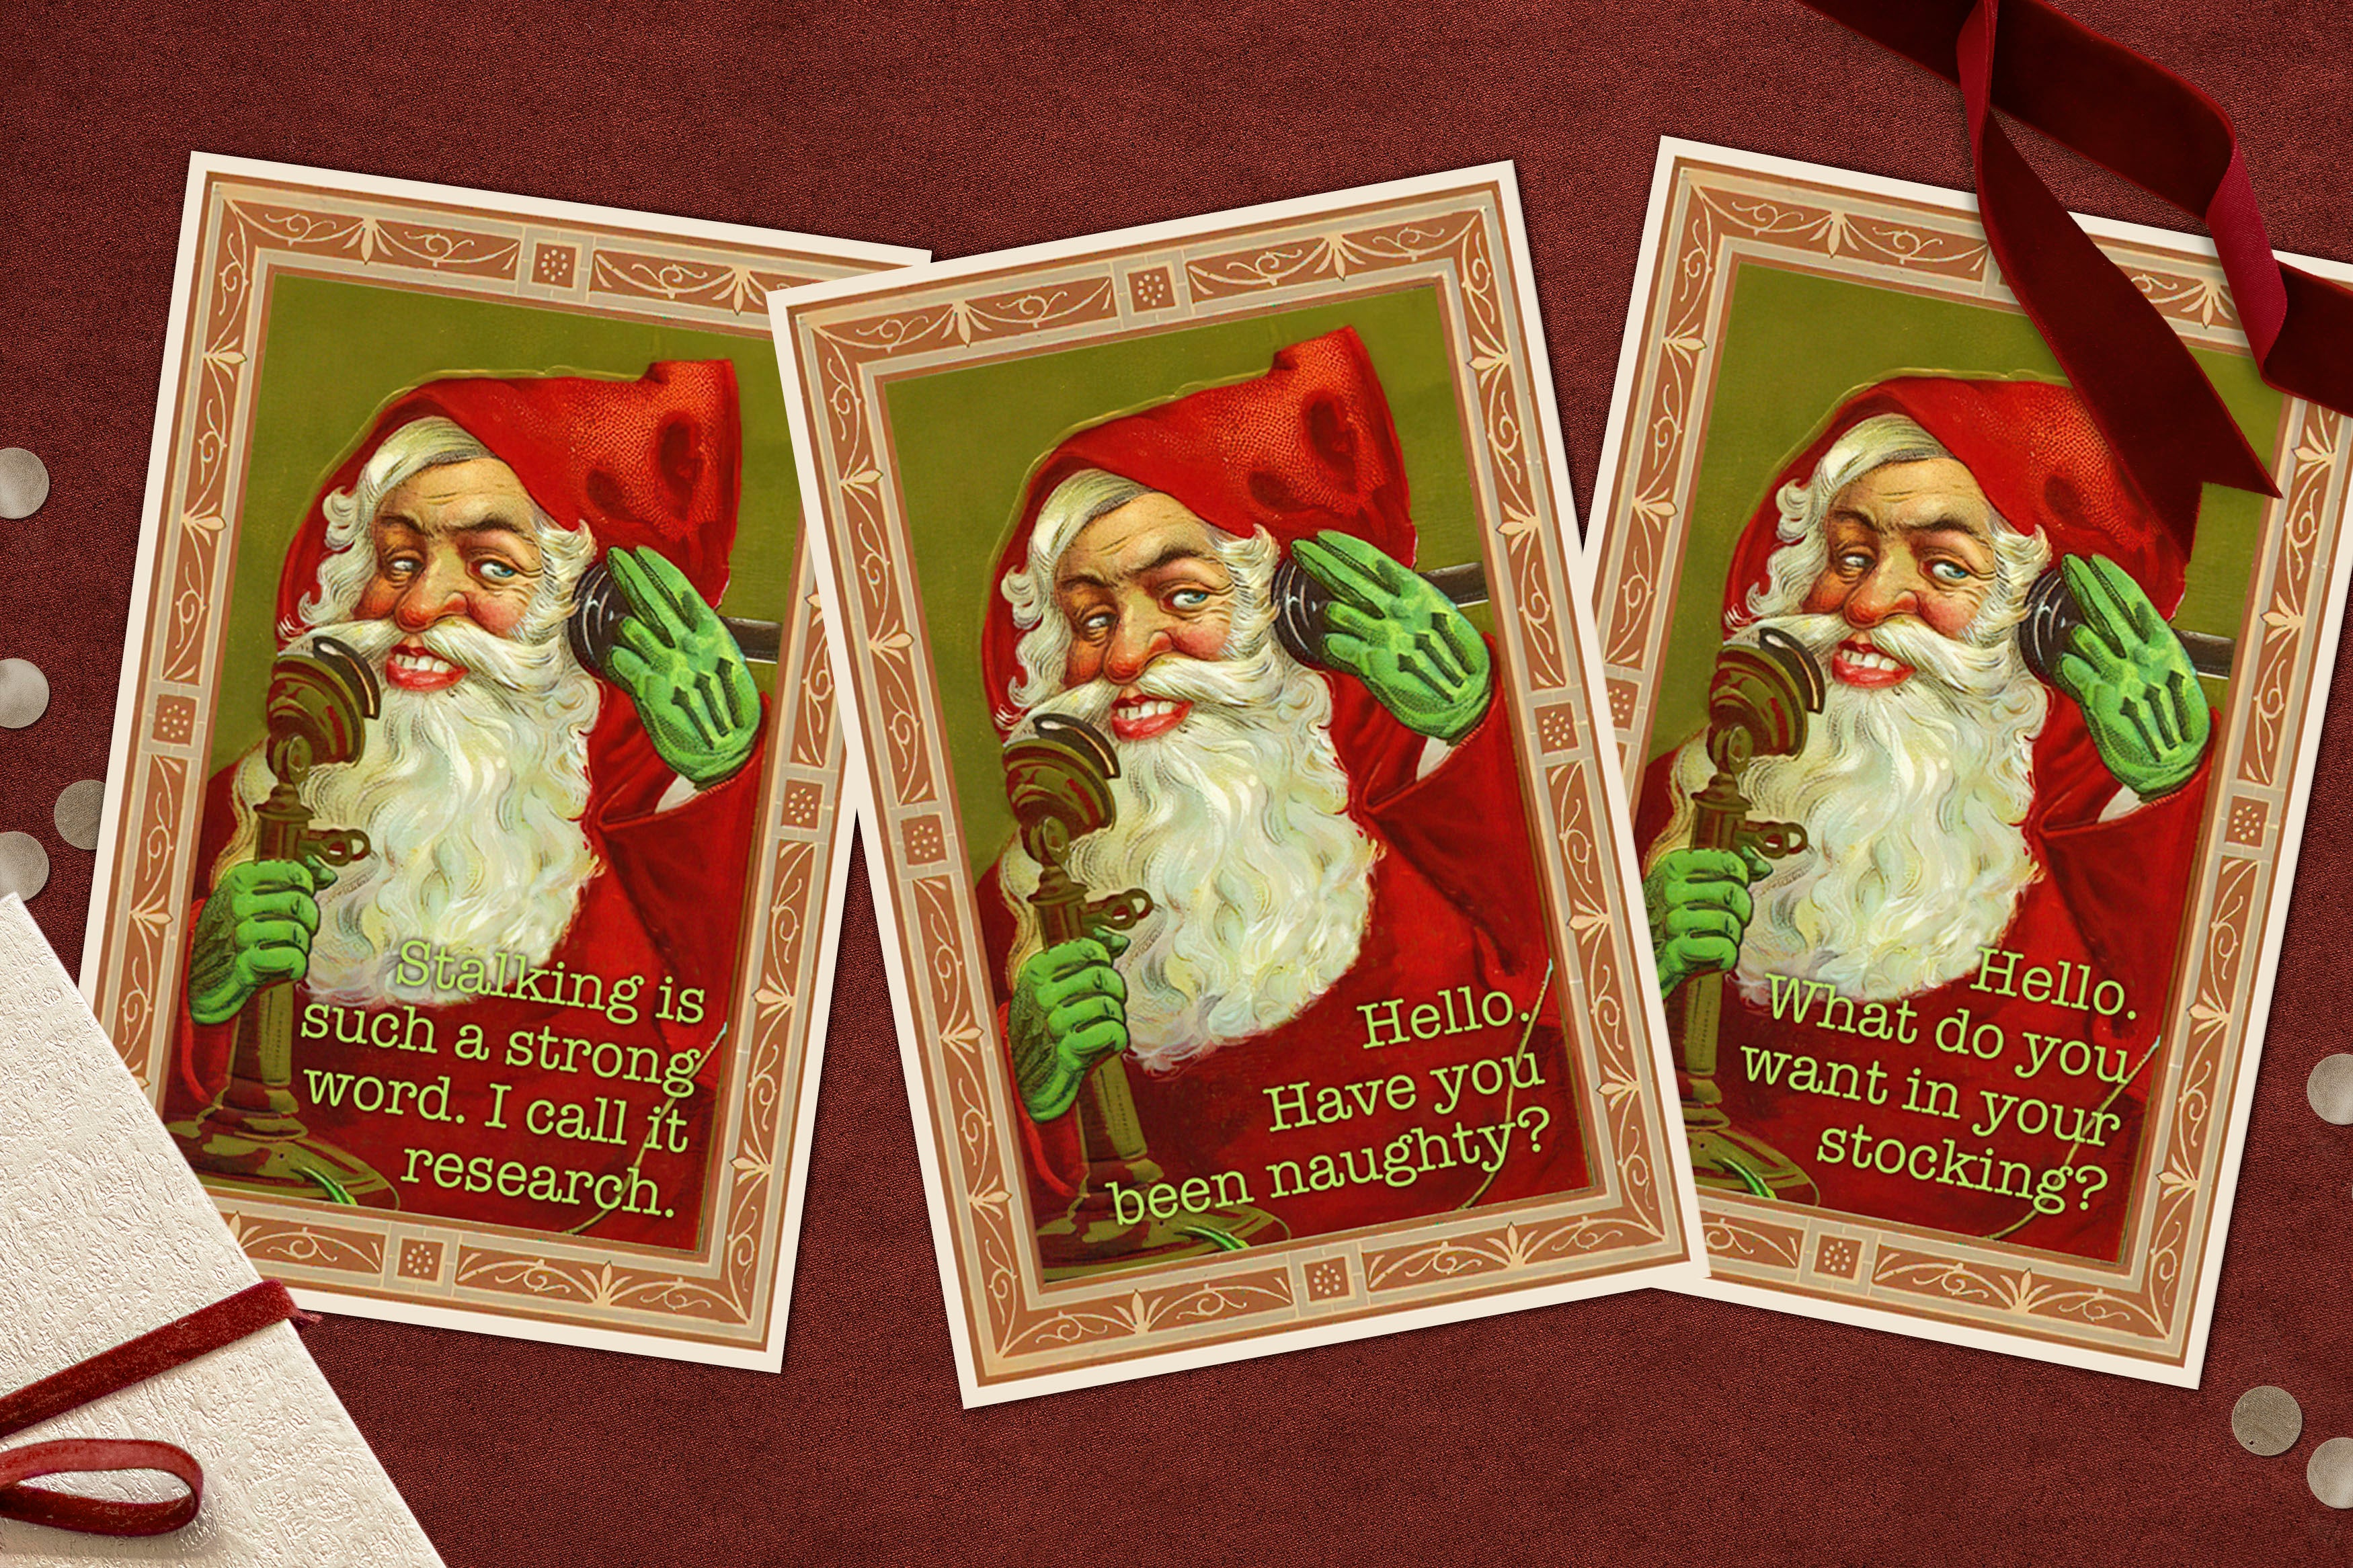 Stalker Santa, Funny and Creepy Victorian Christmas Holiday Postcards, 6 Designs, 12 Cards